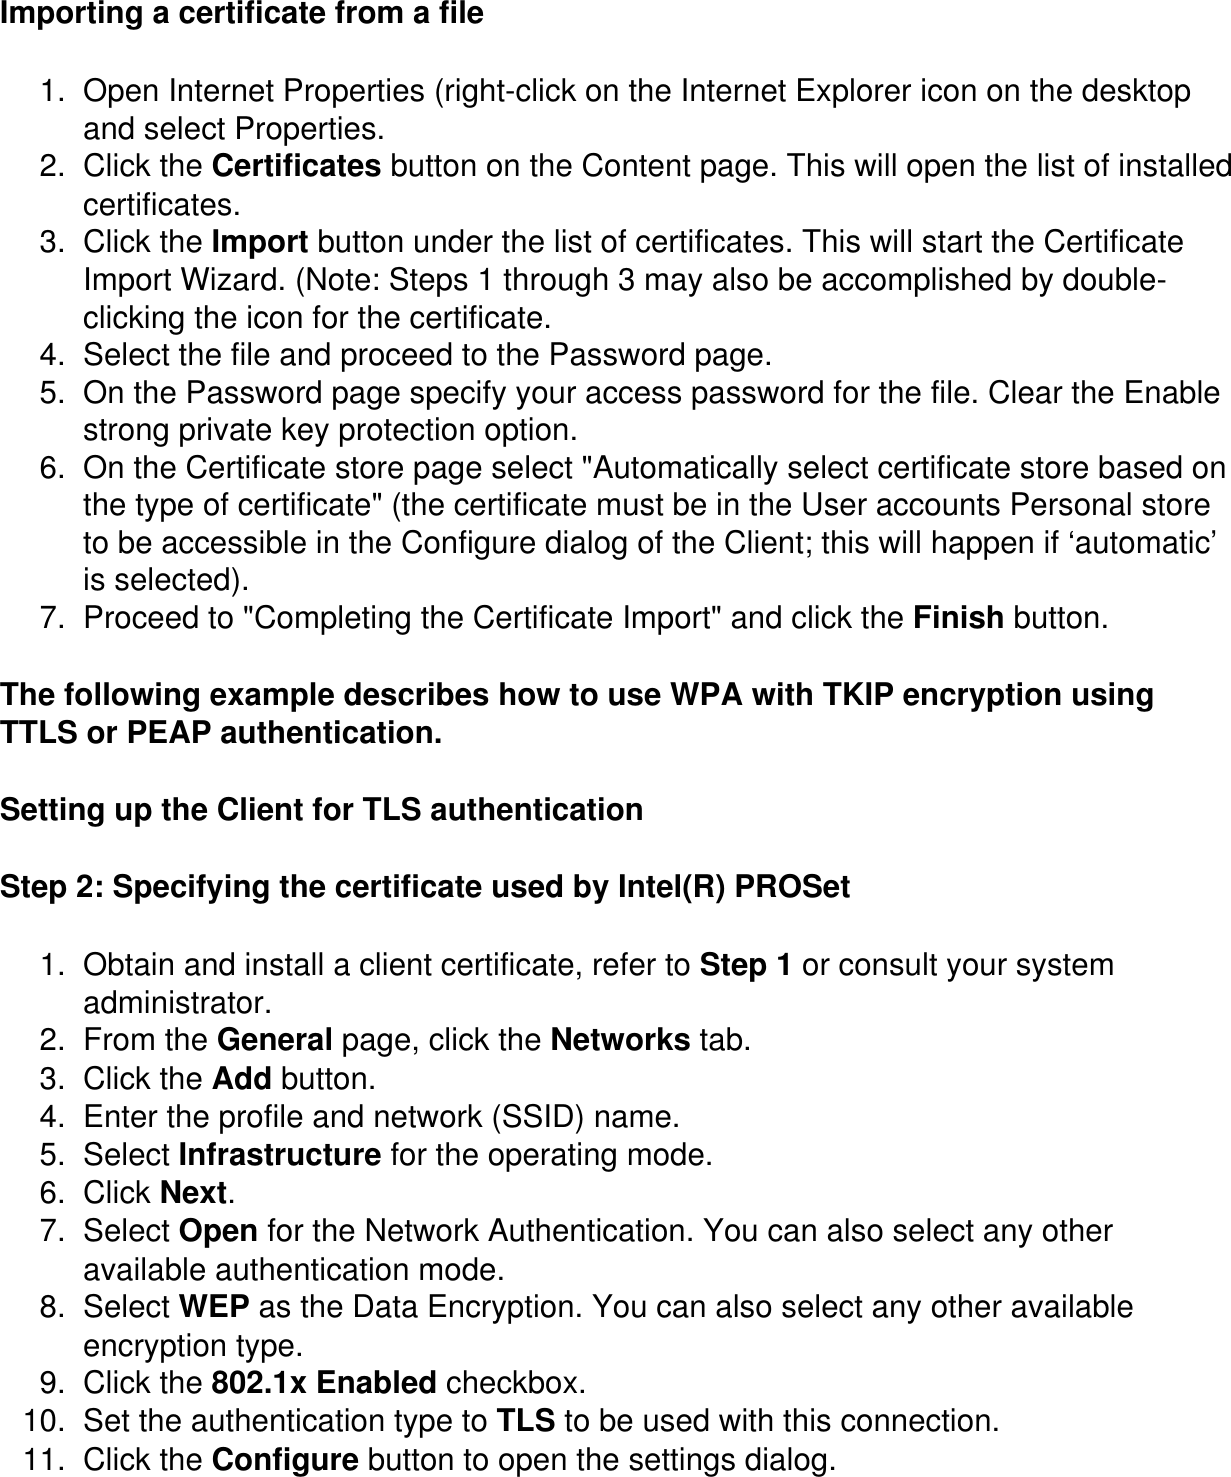 Importing a certificate from a file1.  Open Internet Properties (right-click on the Internet Explorer icon on the desktop and select Properties.2.  Click the Certificates button on the Content page. This will open the list of installed certificates.3.  Click the Import button under the list of certificates. This will start the Certificate Import Wizard. (Note: Steps 1 through 3 may also be accomplished by double-clicking the icon for the certificate.4.  Select the file and proceed to the Password page.5.  On the Password page specify your access password for the file. Clear the Enable strong private key protection option.6.  On the Certificate store page select &quot;Automatically select certificate store based on the type of certificate&quot; (the certificate must be in the User accounts Personal store to be accessible in the Configure dialog of the Client; this will happen if ‘automatic’ is selected).7.  Proceed to &quot;Completing the Certificate Import&quot; and click the Finish button.The following example describes how to use WPA with TKIP encryption using TTLS or PEAP authentication. Setting up the Client for TLS authenticationStep 2: Specifying the certificate used by Intel(R) PROSet1.  Obtain and install a client certificate, refer to Step 1 or consult your system administrator. 2.  From the General page, click the Networks tab. 3.  Click the Add button. 4.  Enter the profile and network (SSID) name. 5.  Select Infrastructure for the operating mode. 6.  Click Next. 7.  Select Open for the Network Authentication. You can also select any other available authentication mode. 8.  Select WEP as the Data Encryption. You can also select any other available encryption type. 9.  Click the 802.1x Enabled checkbox. 10.  Set the authentication type to TLS to be used with this connection. 11.  Click the Configure button to open the settings dialog. 